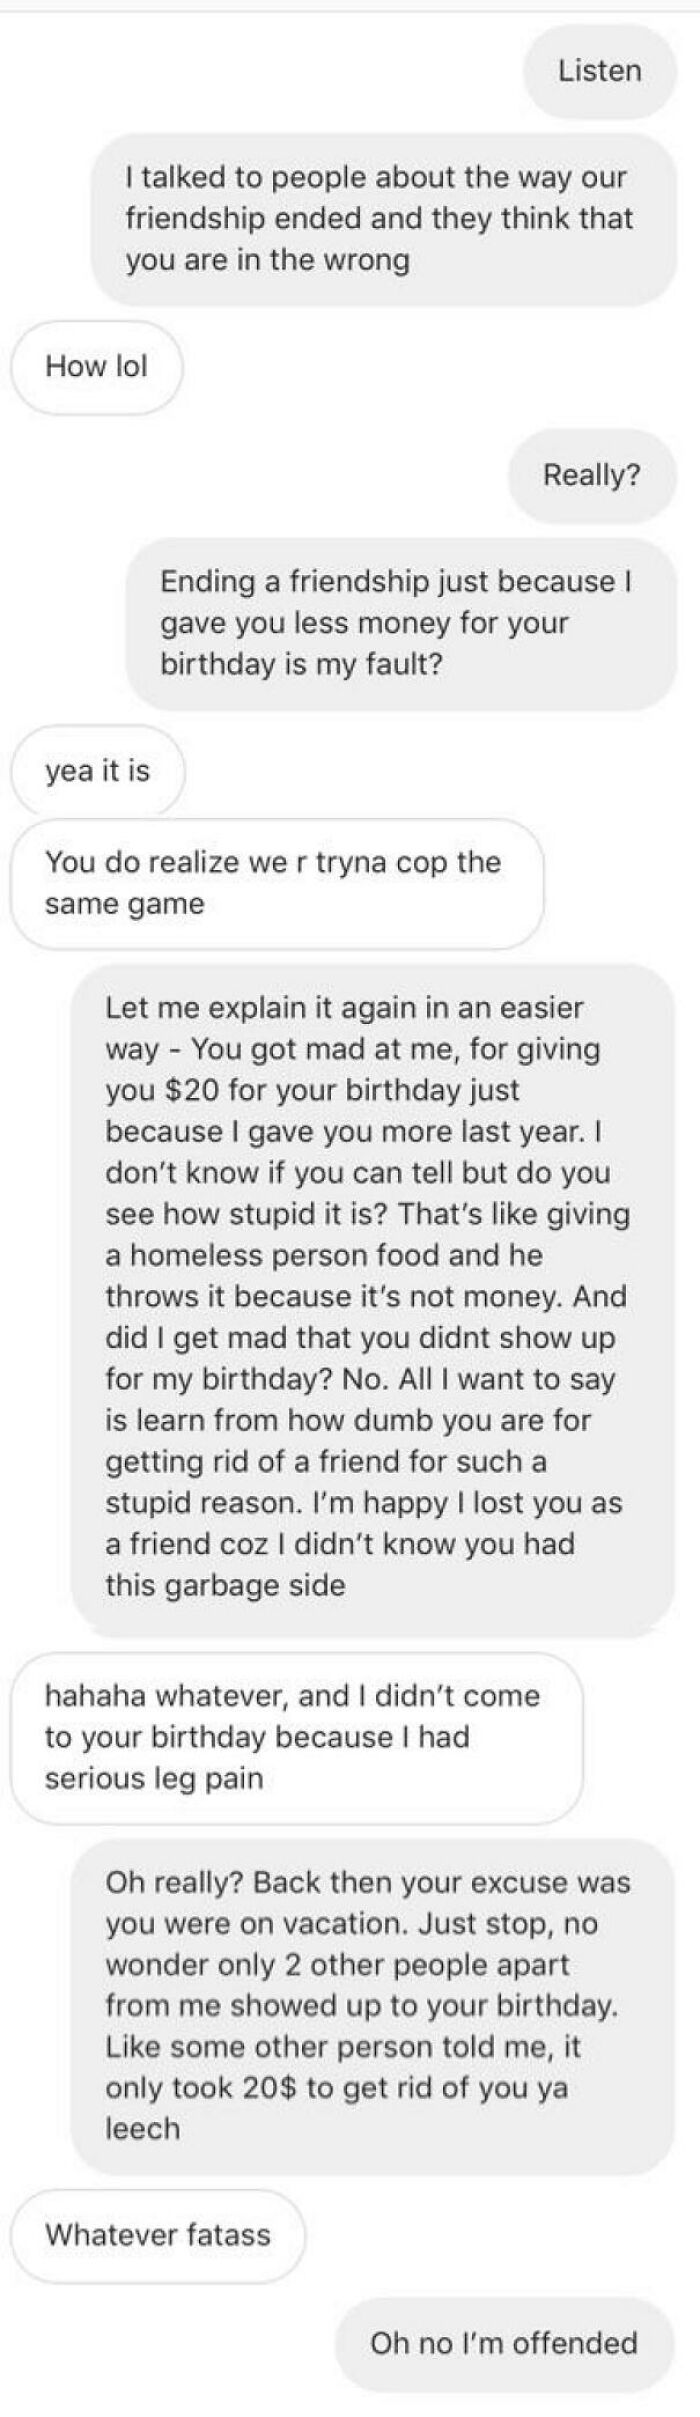 I Made A Post Awhile Back About My Cb Exfriend Who Got Mad Because I Gave Him Less Money For His Birthday Compared To Last Year, And After The Post And The Comments I Decided To Message Him About It And This Is What He Said